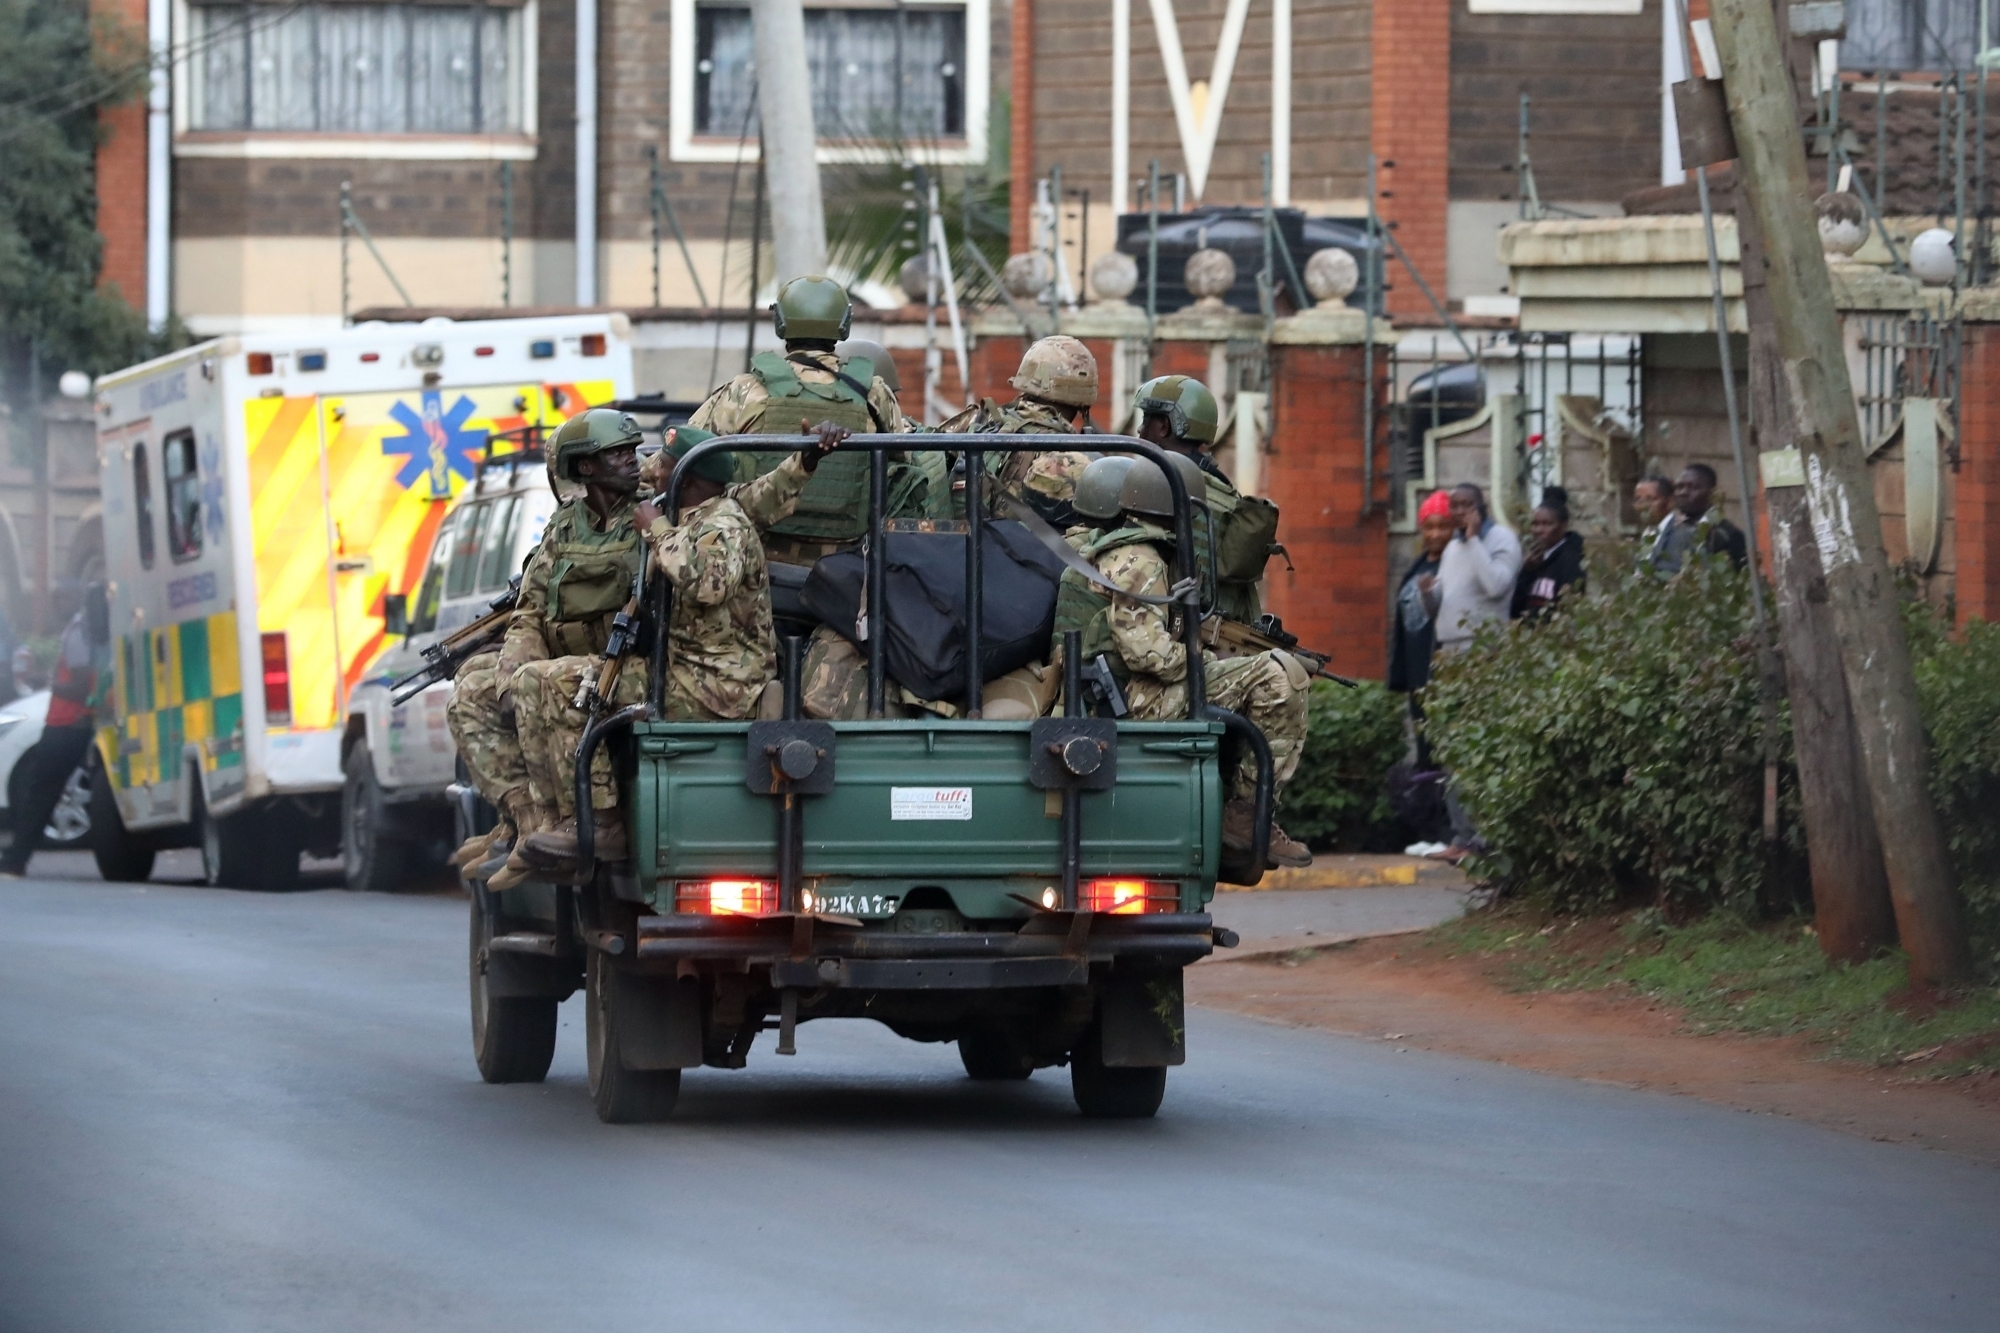 Kenya police officers among eight killed in bus attack